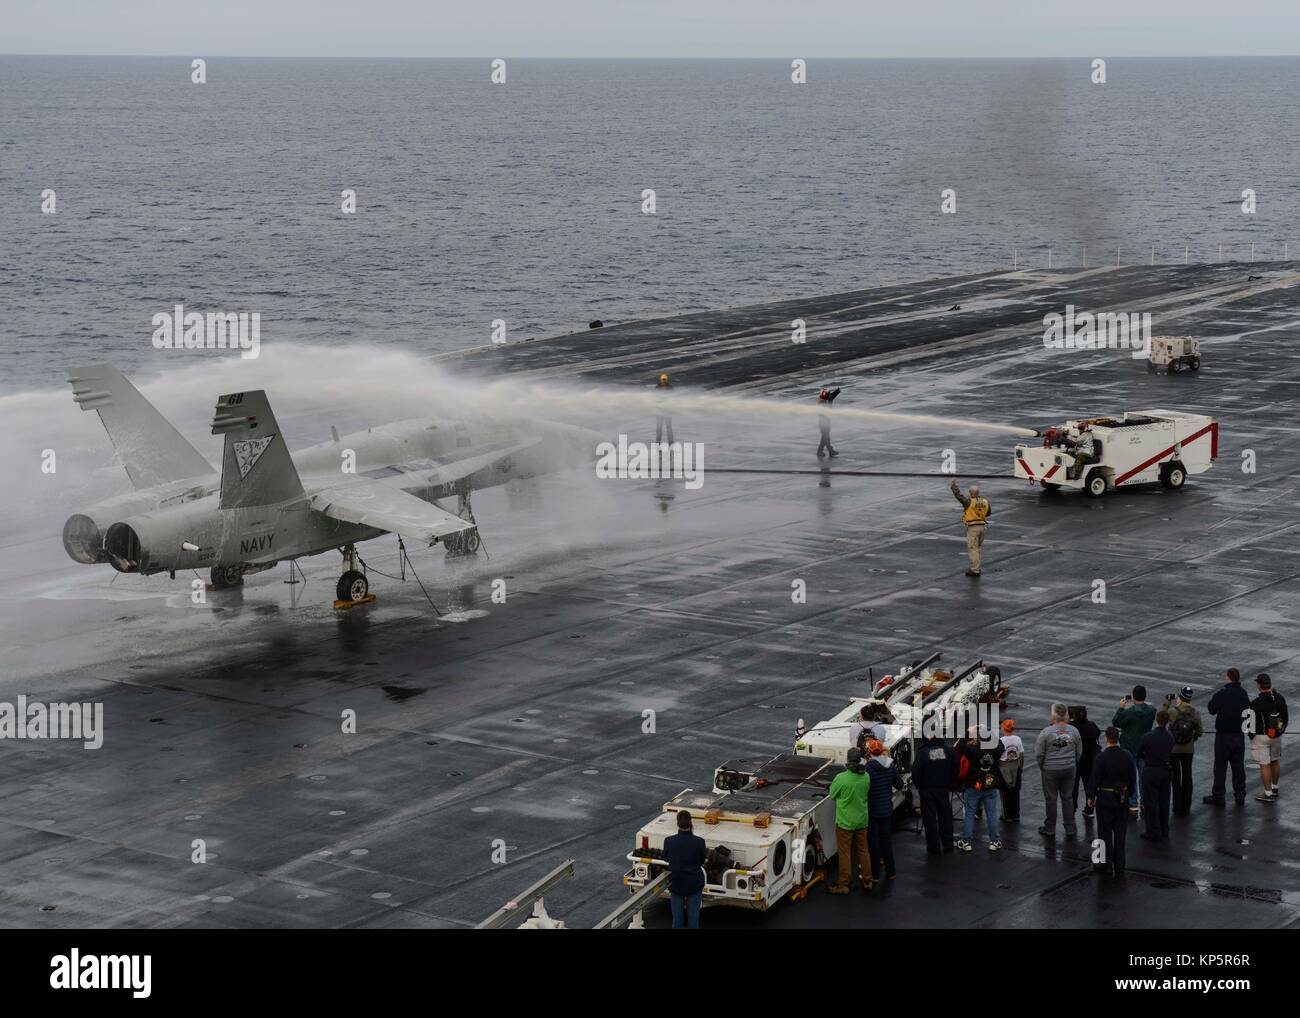 U.S. Navy sailors demonstrate an aircraft crash and salvage drill on the flight deck aboard the U.S. Navy Nimitz-class aircraft carrier USS Nimitz during Tiger Cruise December 8, 2017 in the Pacific Ocean.  (photo by Holly L. Herline via Planetpix) Stock Photo